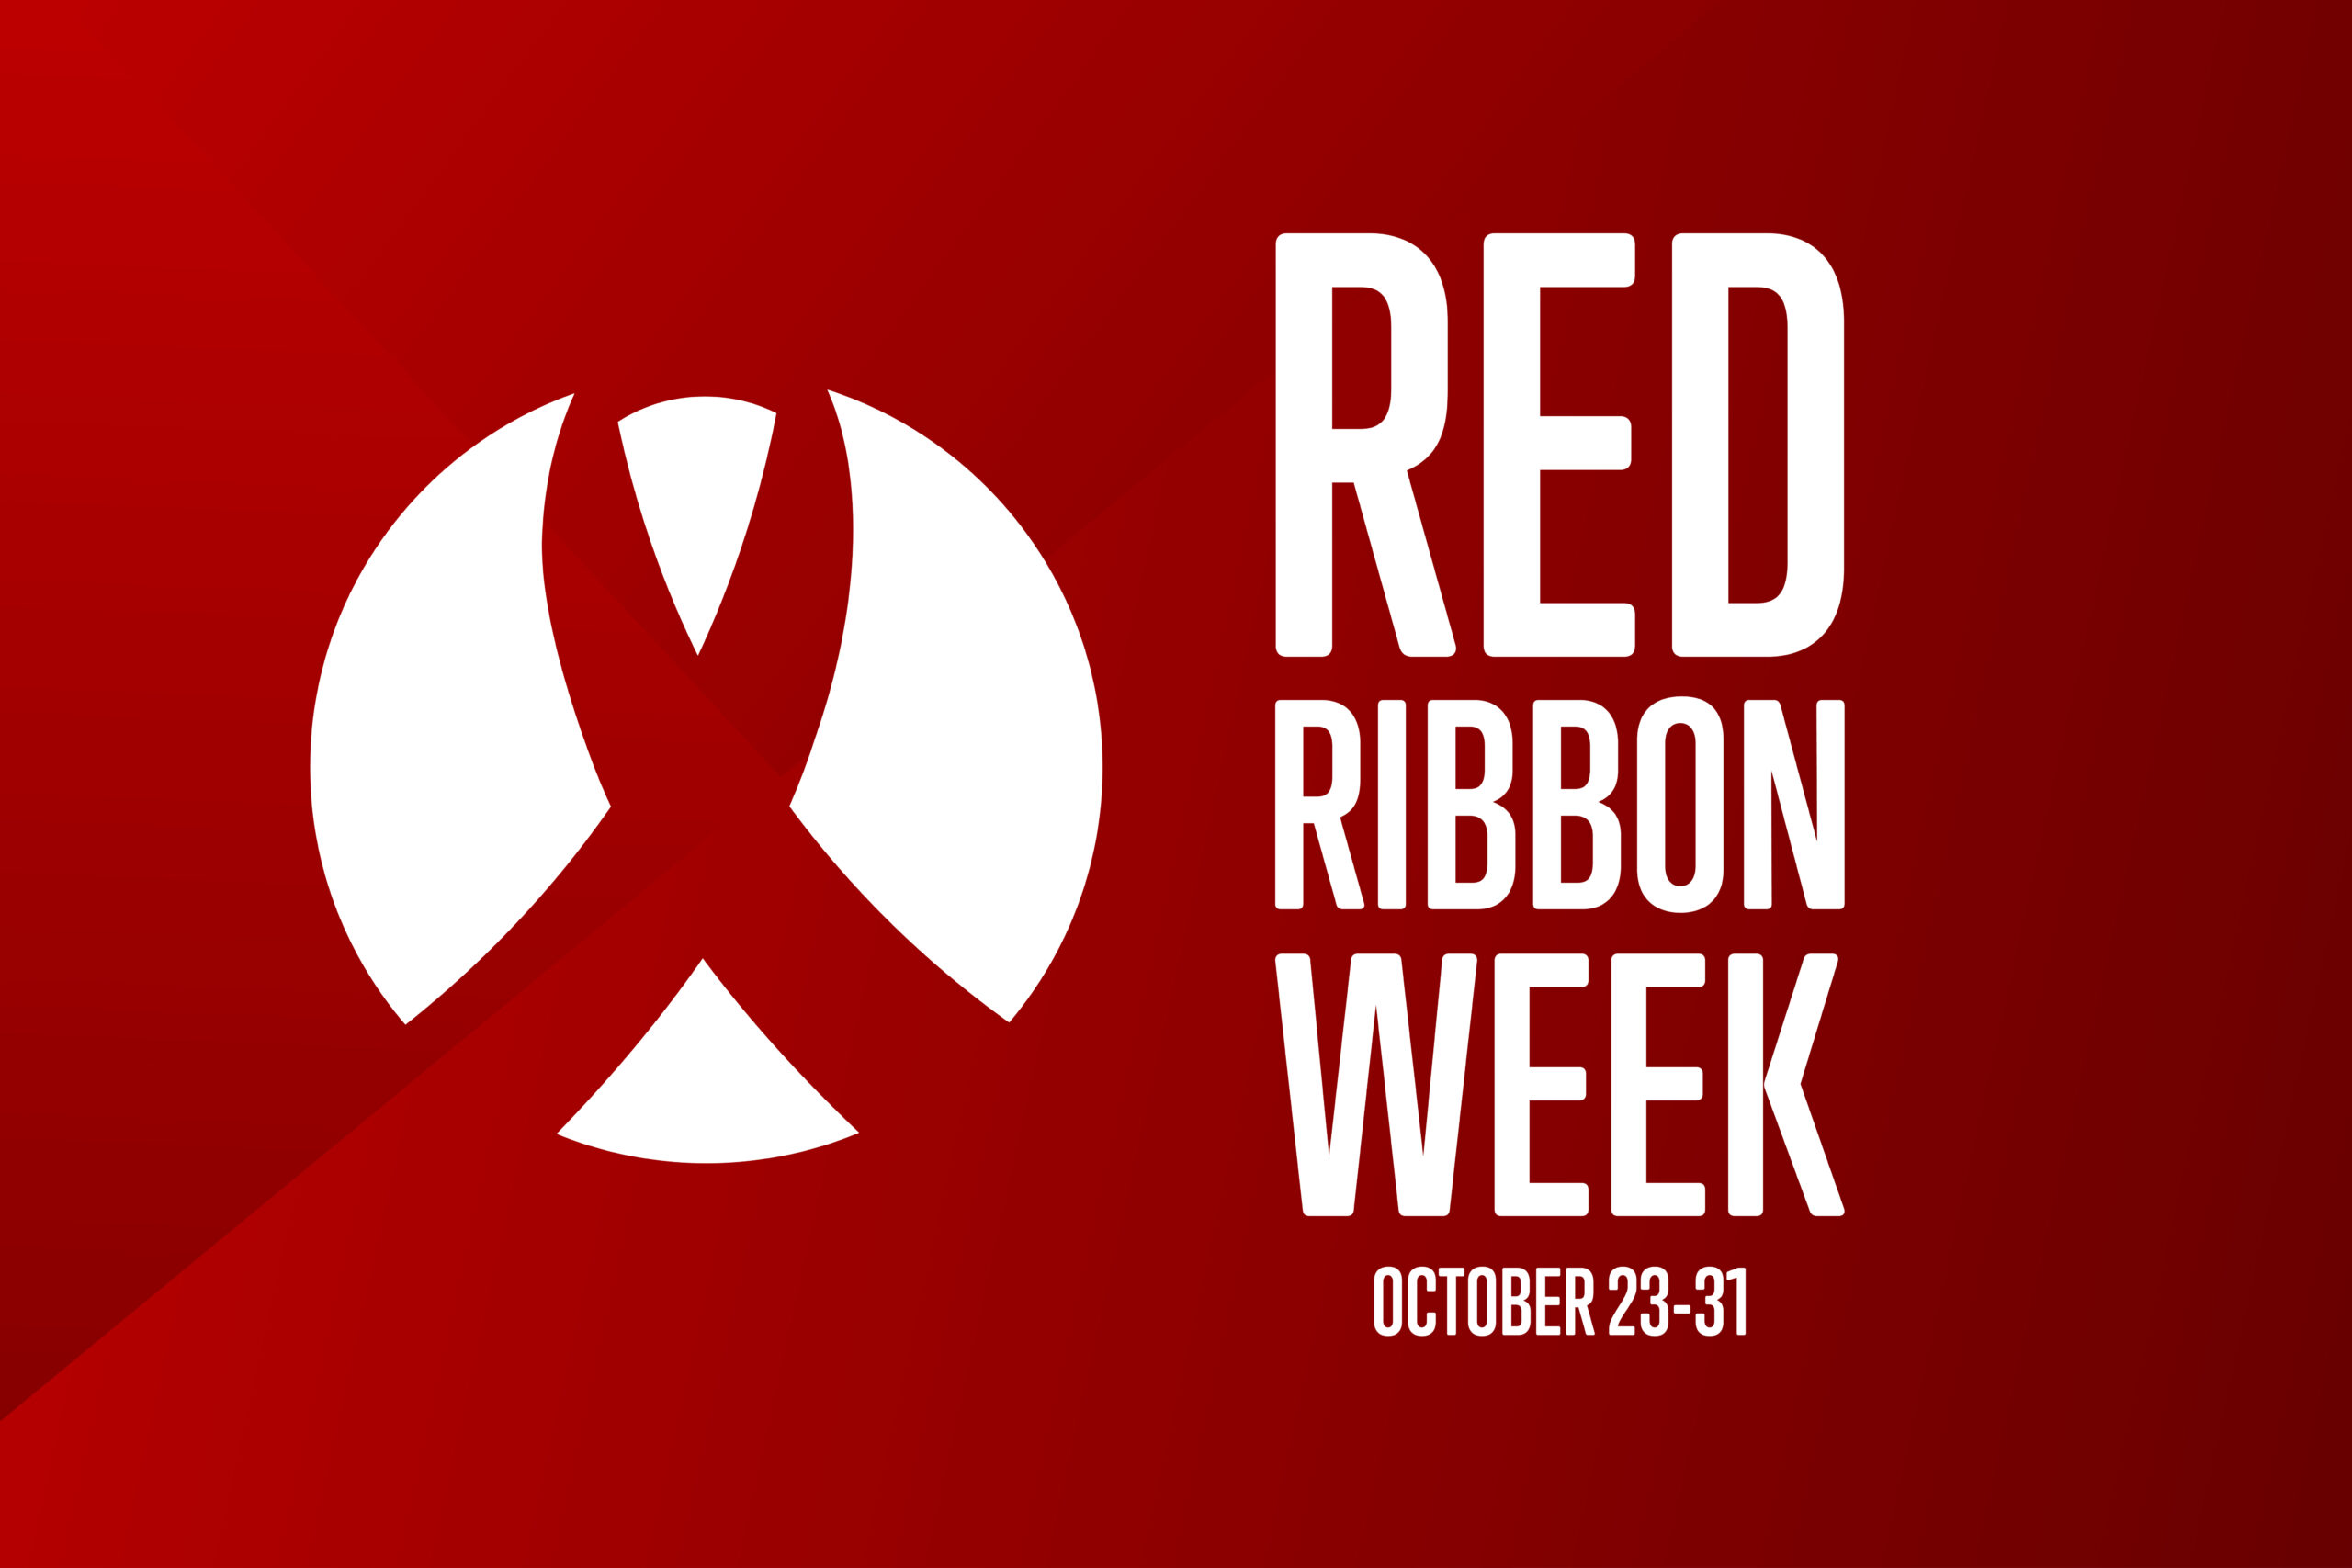 Red Ribbon Week is October 23-31